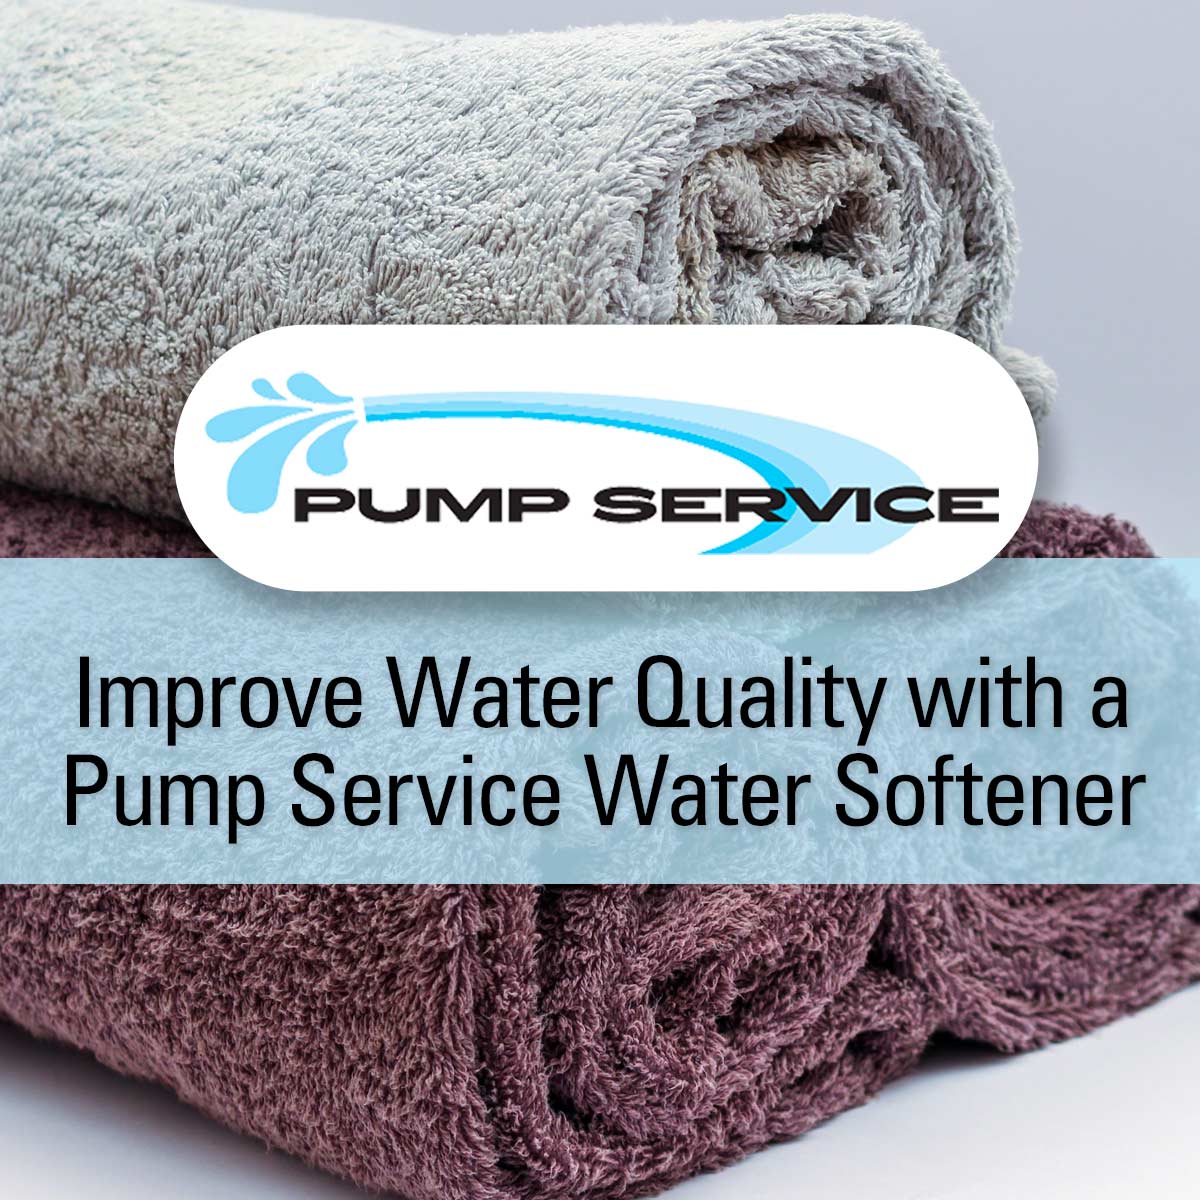 Improve Water Quality with a Pump Service Water Softener